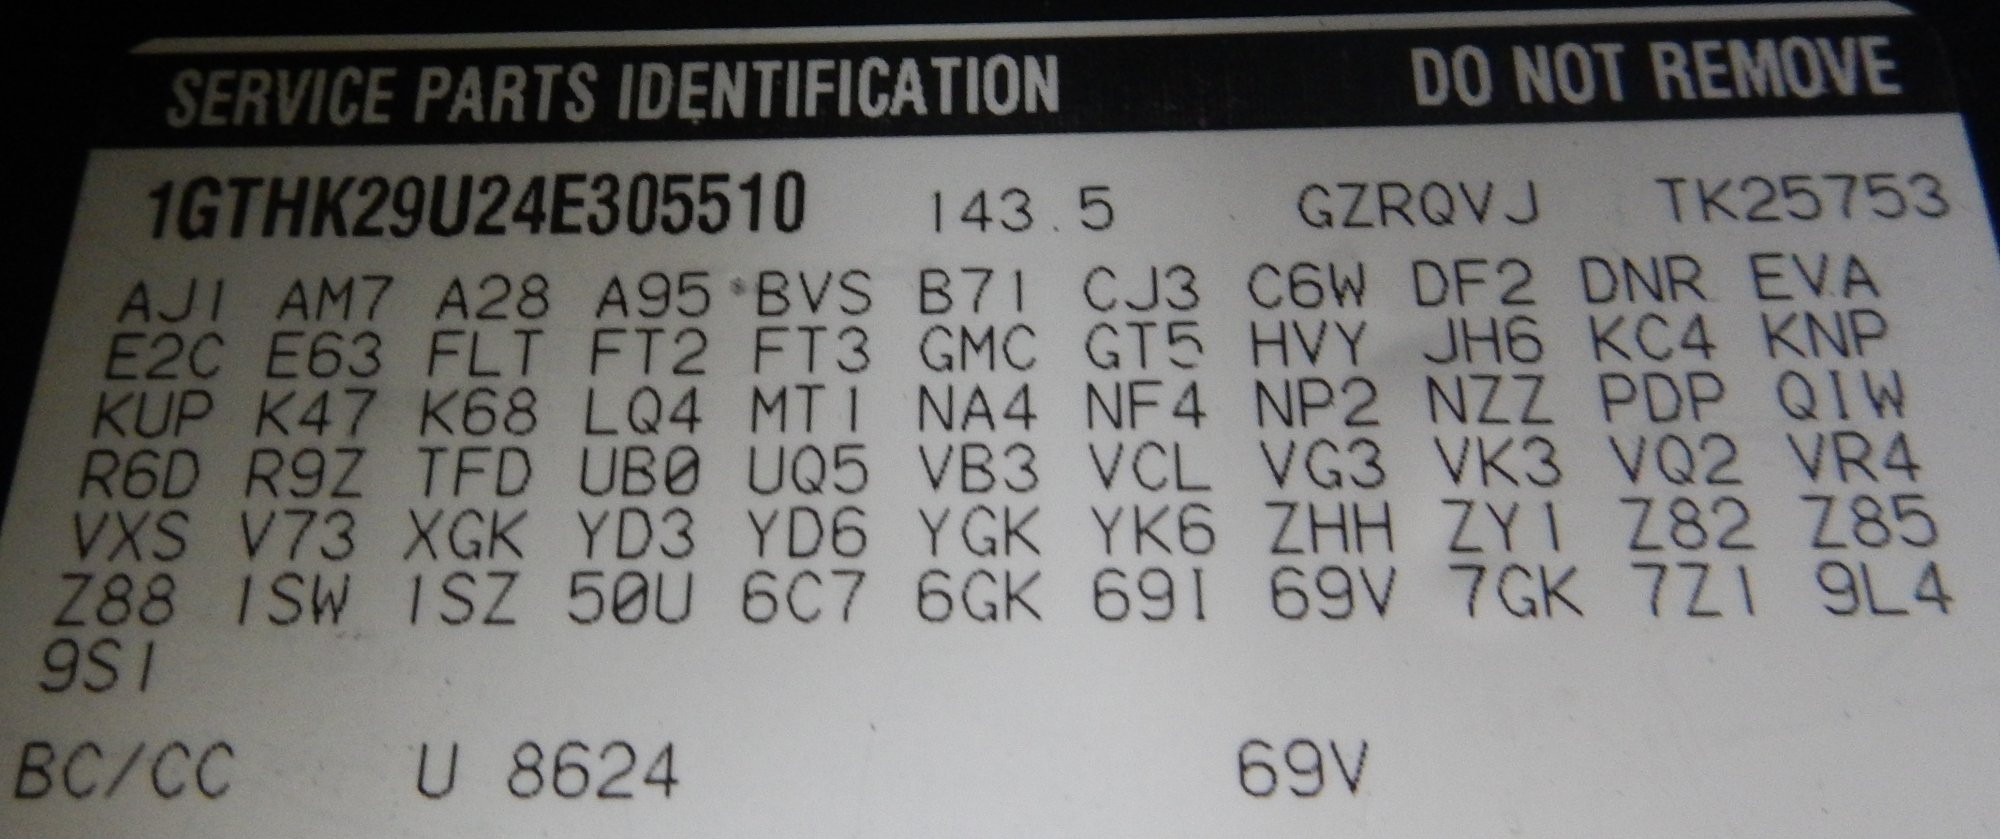 Service Parts Identification Codes Gm Carinside